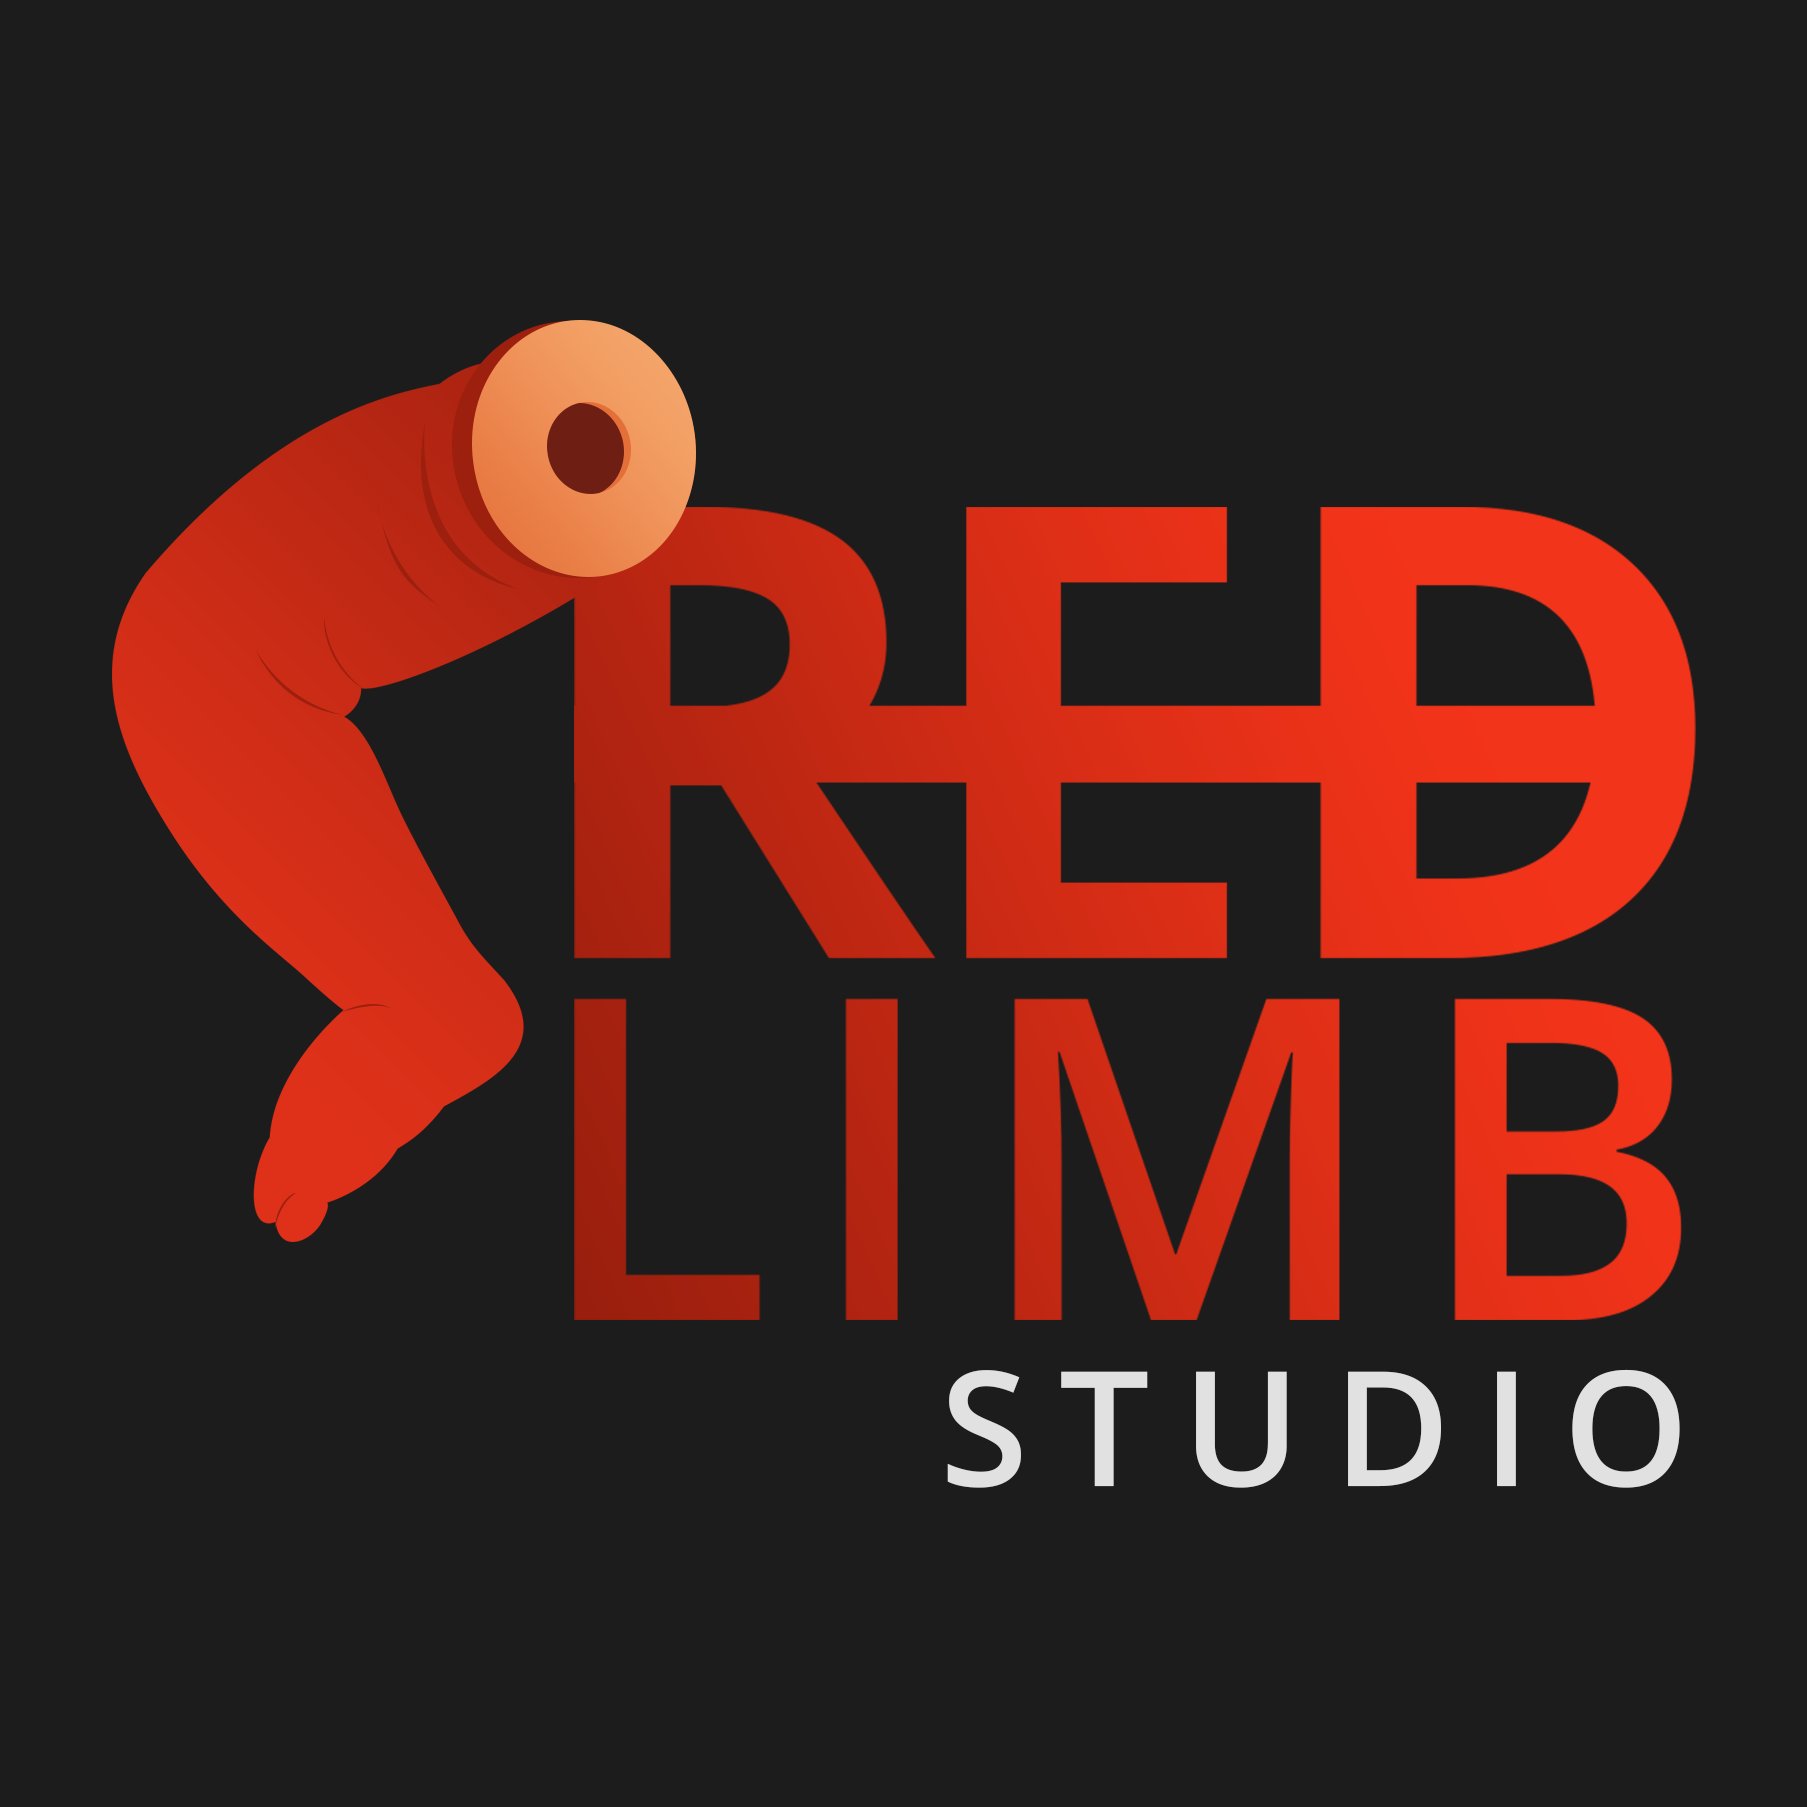 Red Limb Studio - an independent team of game developers.
- Beat Me! - https://t.co/8uq1Qi00Ft
- Rise of Insanity - https://t.co/jRp2S93rgq
- The Purge Day
- Kamikaze Veggies